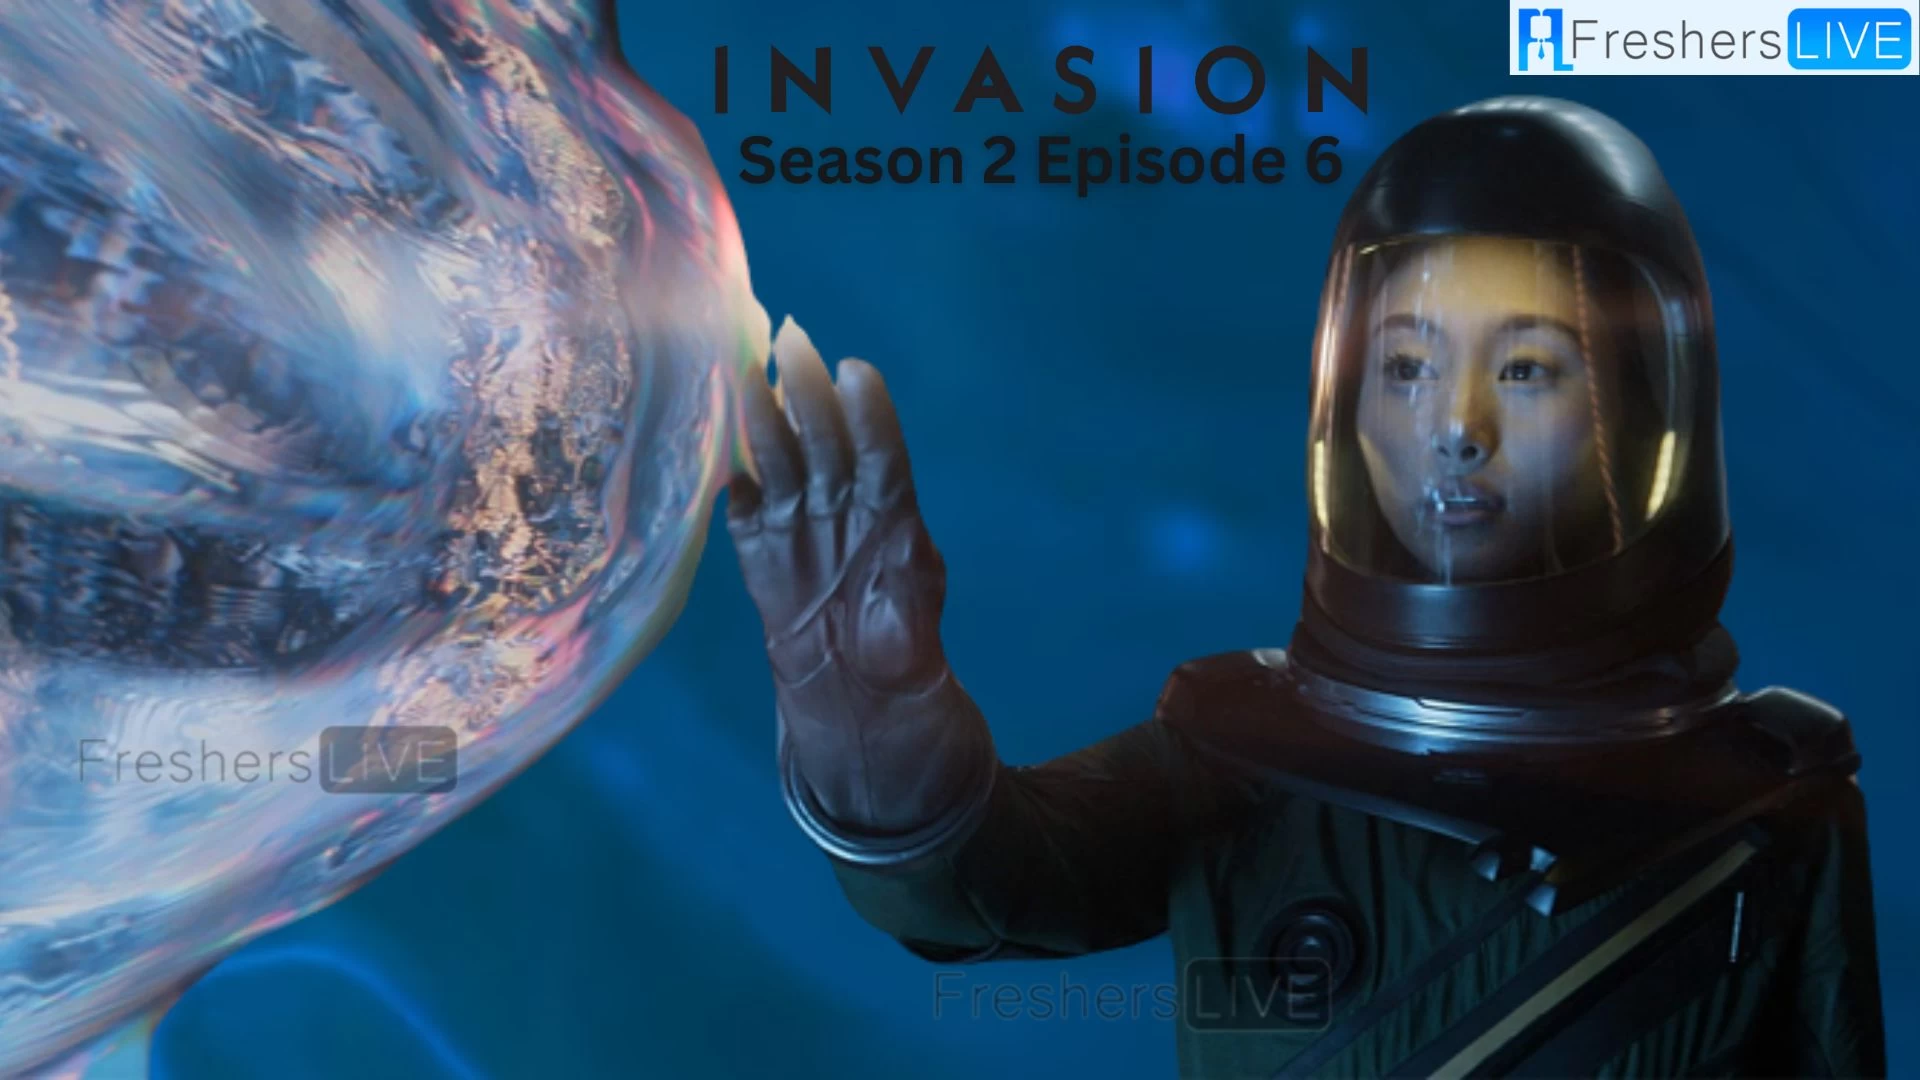 Invasion Season 2 Episode 6 Ending Explained, Cast, Plot, Review, Where to Watch and More